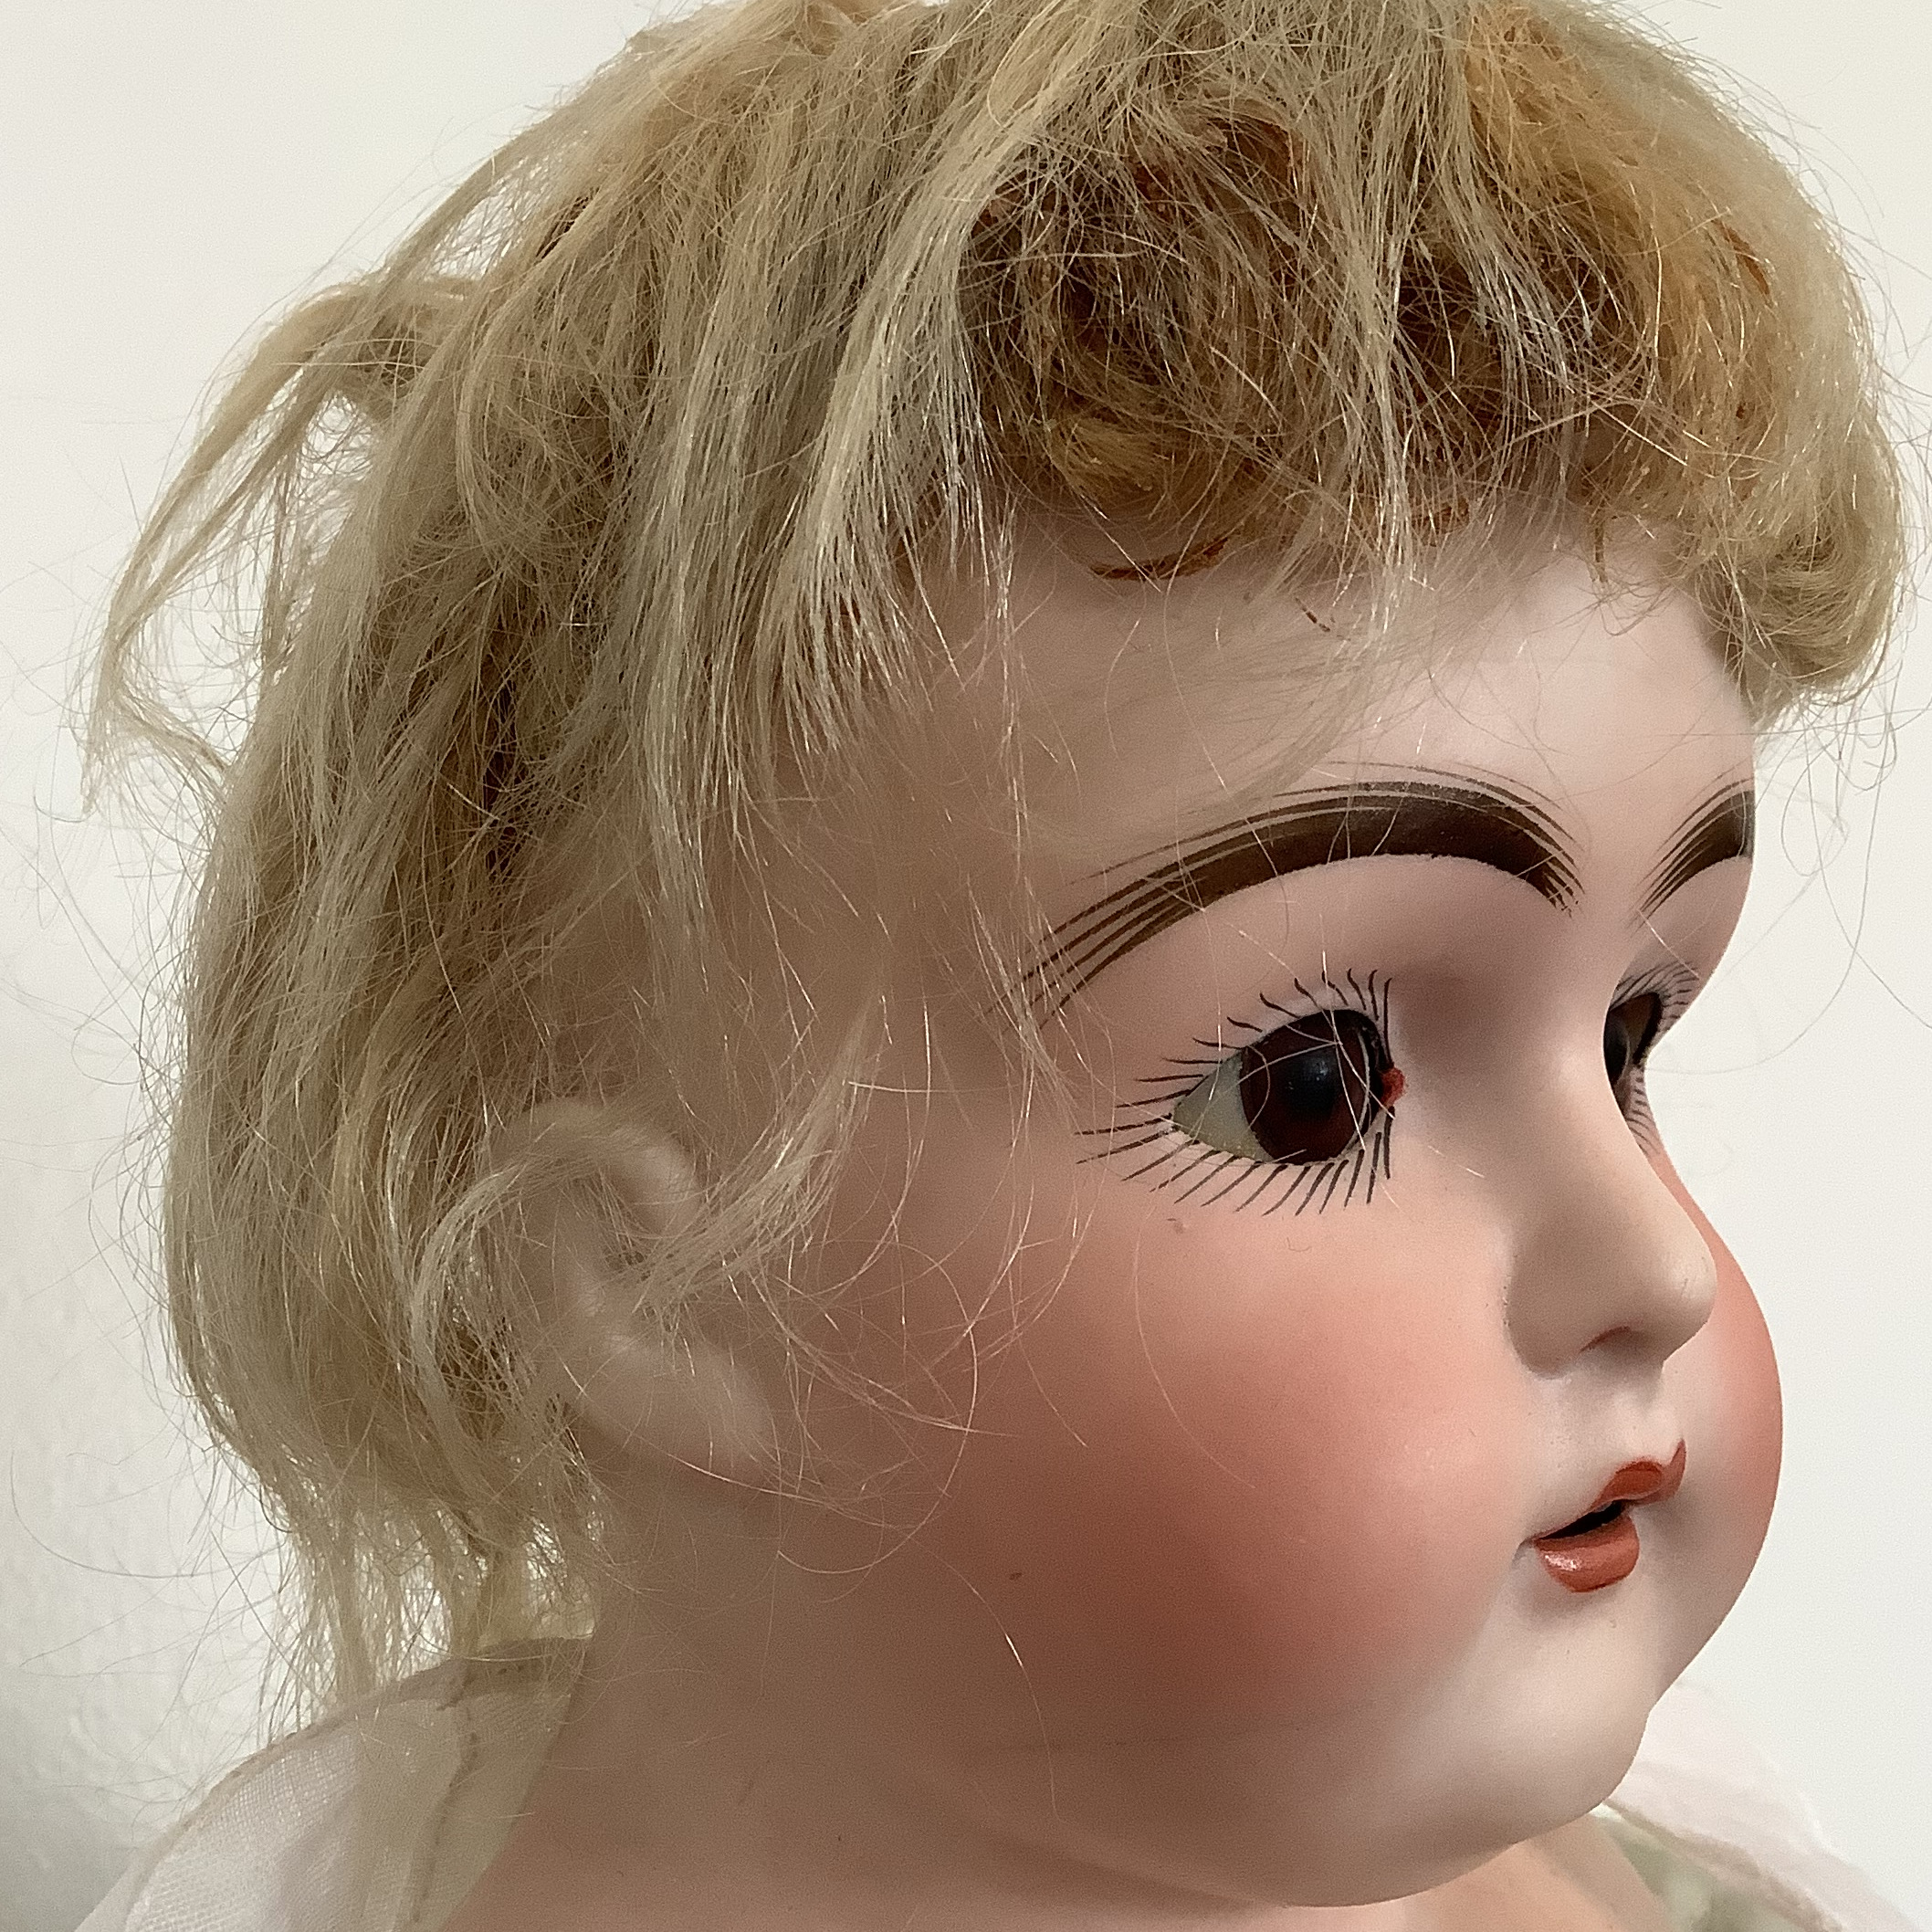 Face of antique doll